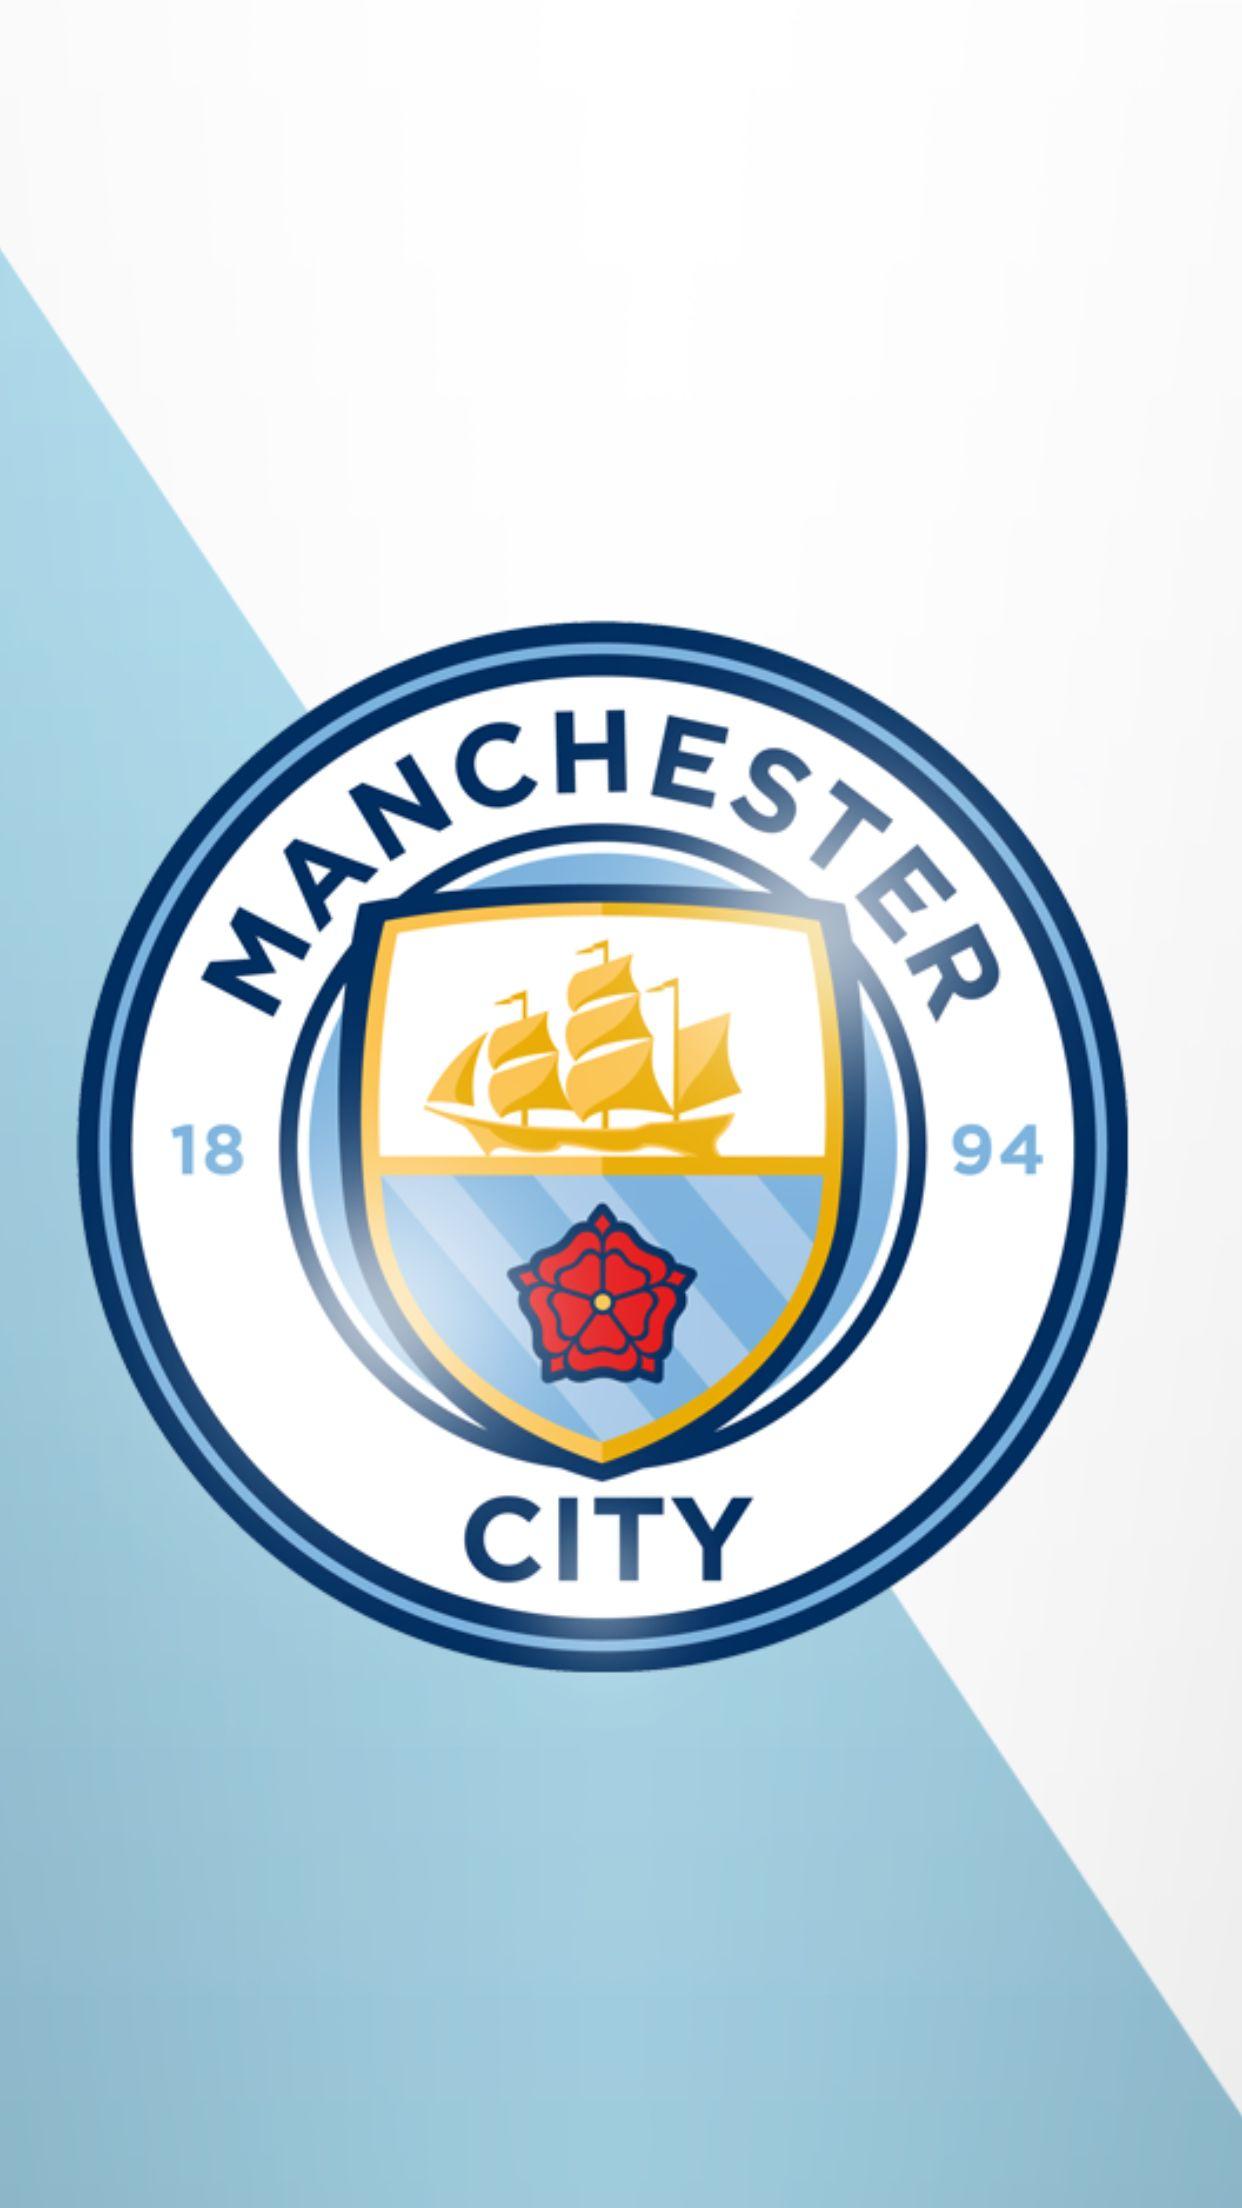 New Manchester City iPhone iPad wallpaper #mcfc #Manchester